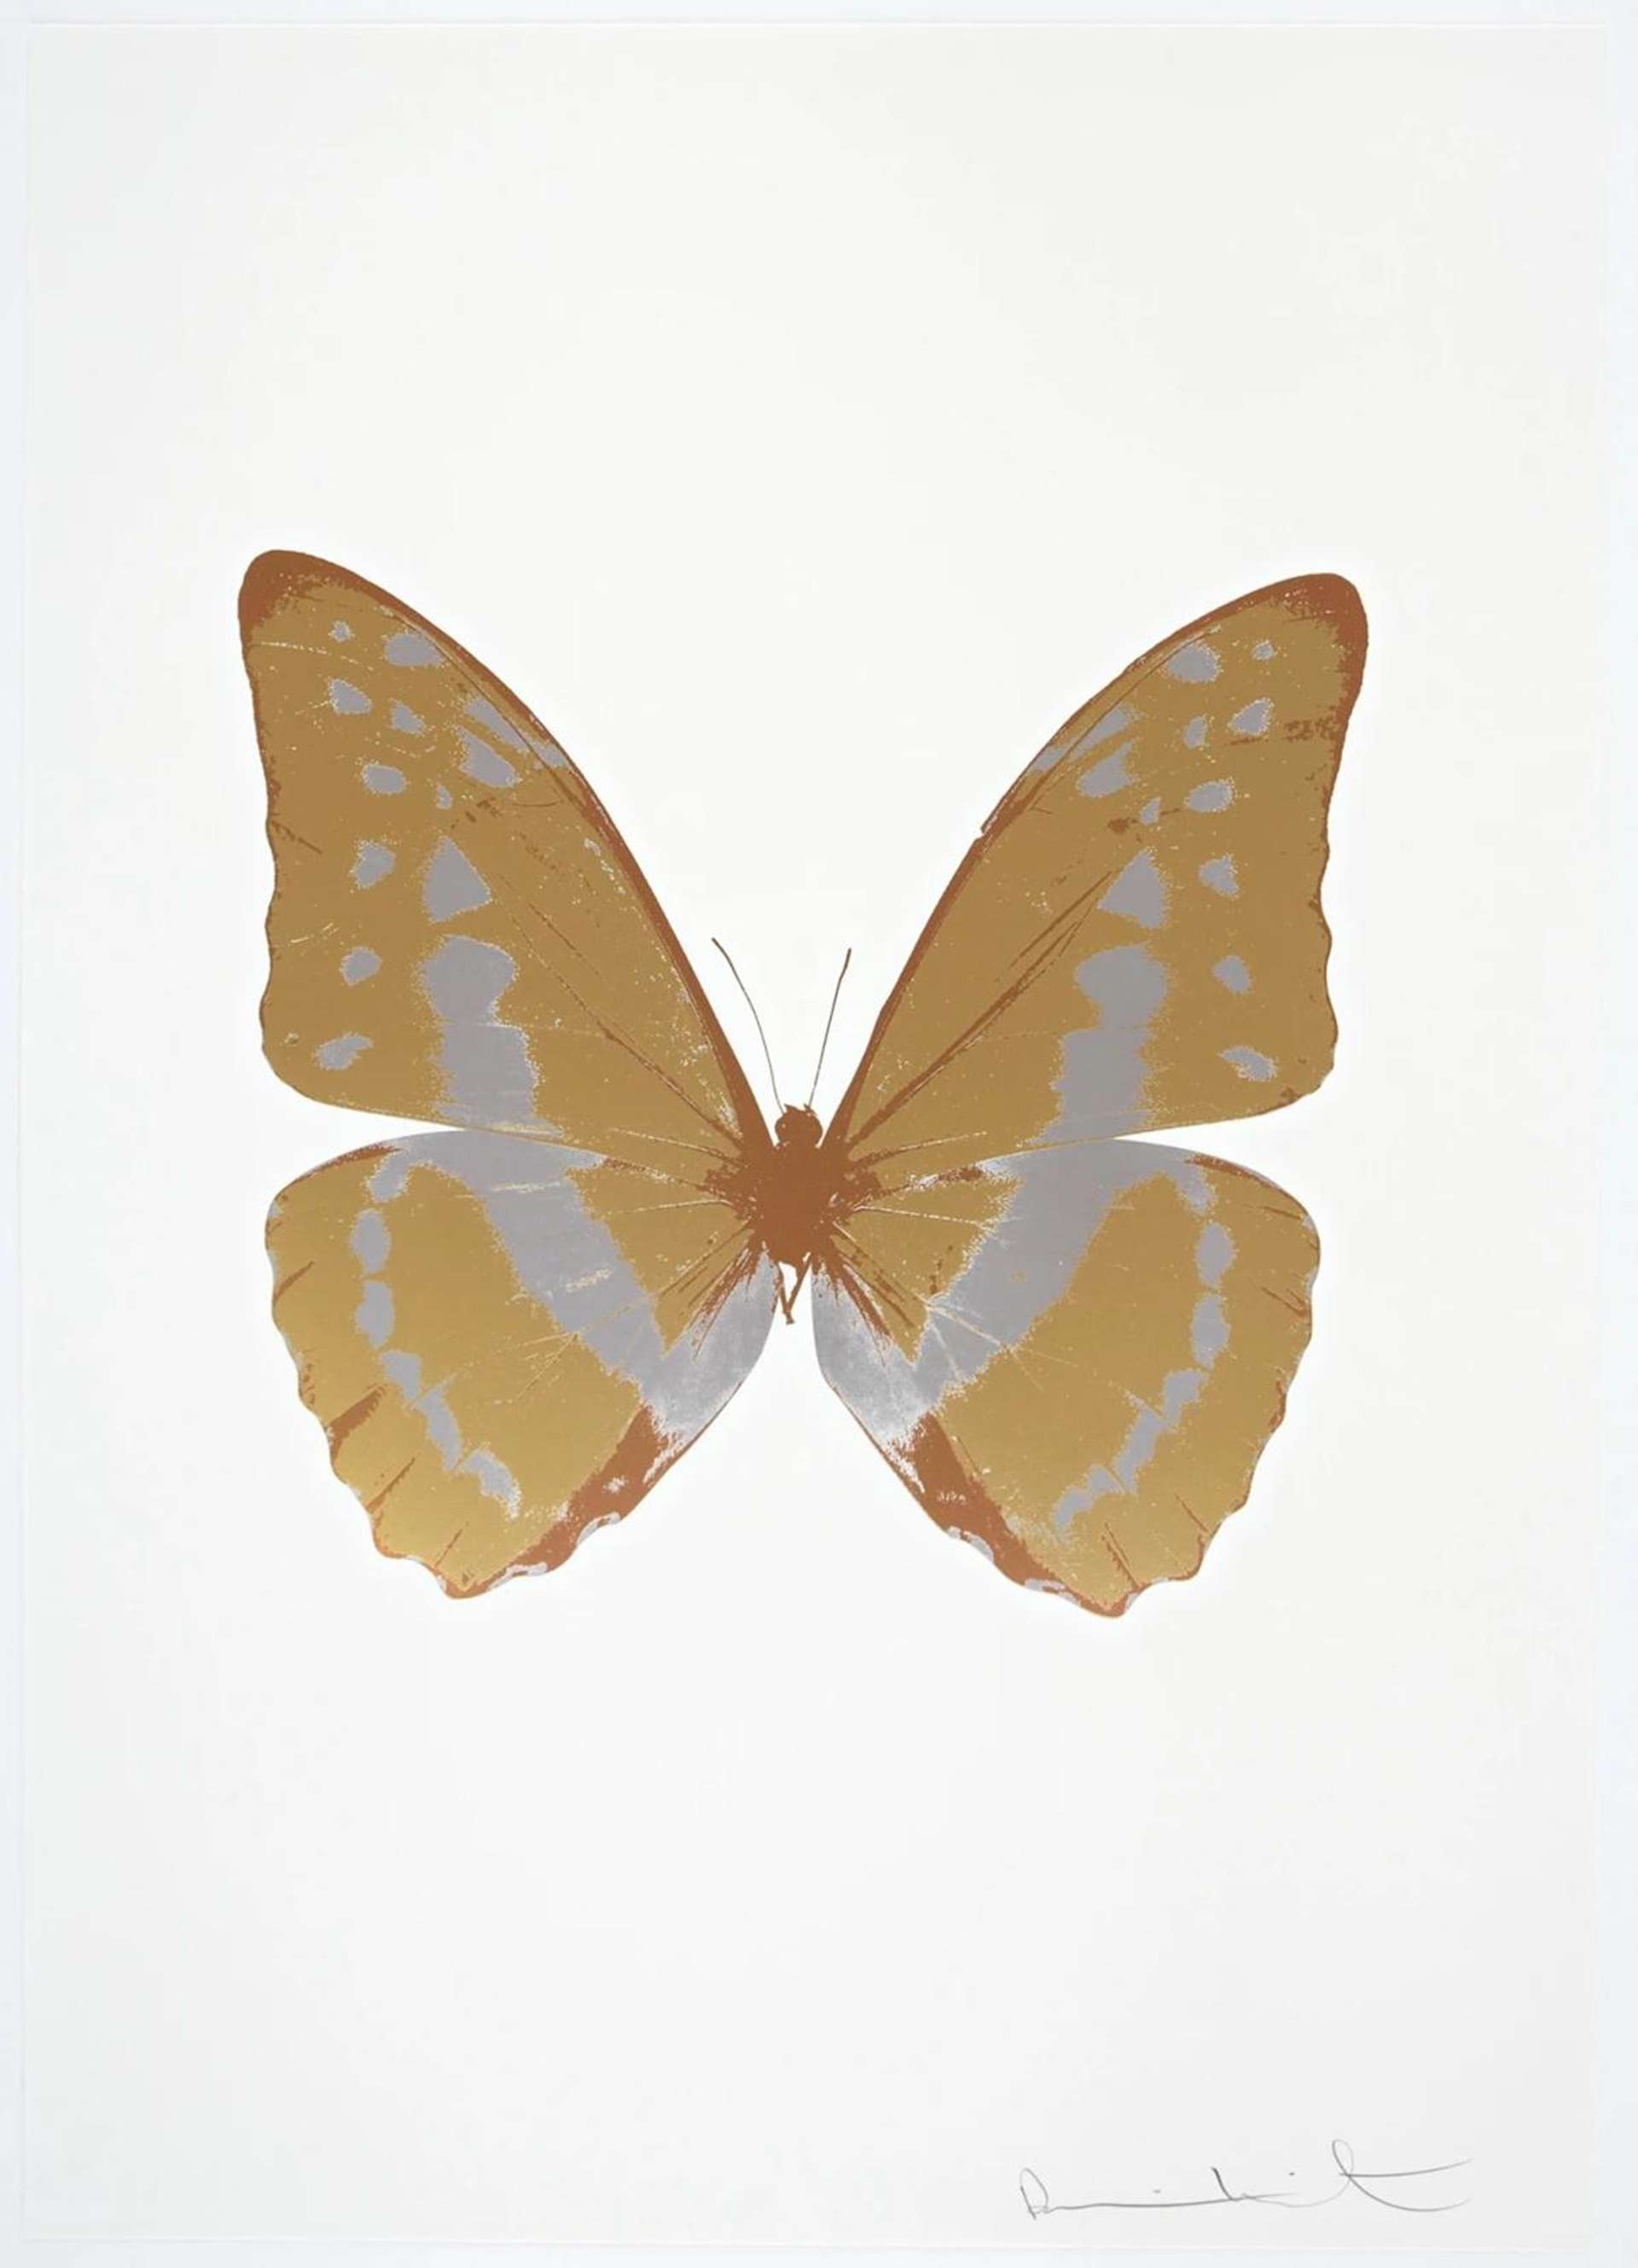 The Souls III (hazy gold, silver gloss, rustic copper) by Damien Hirst